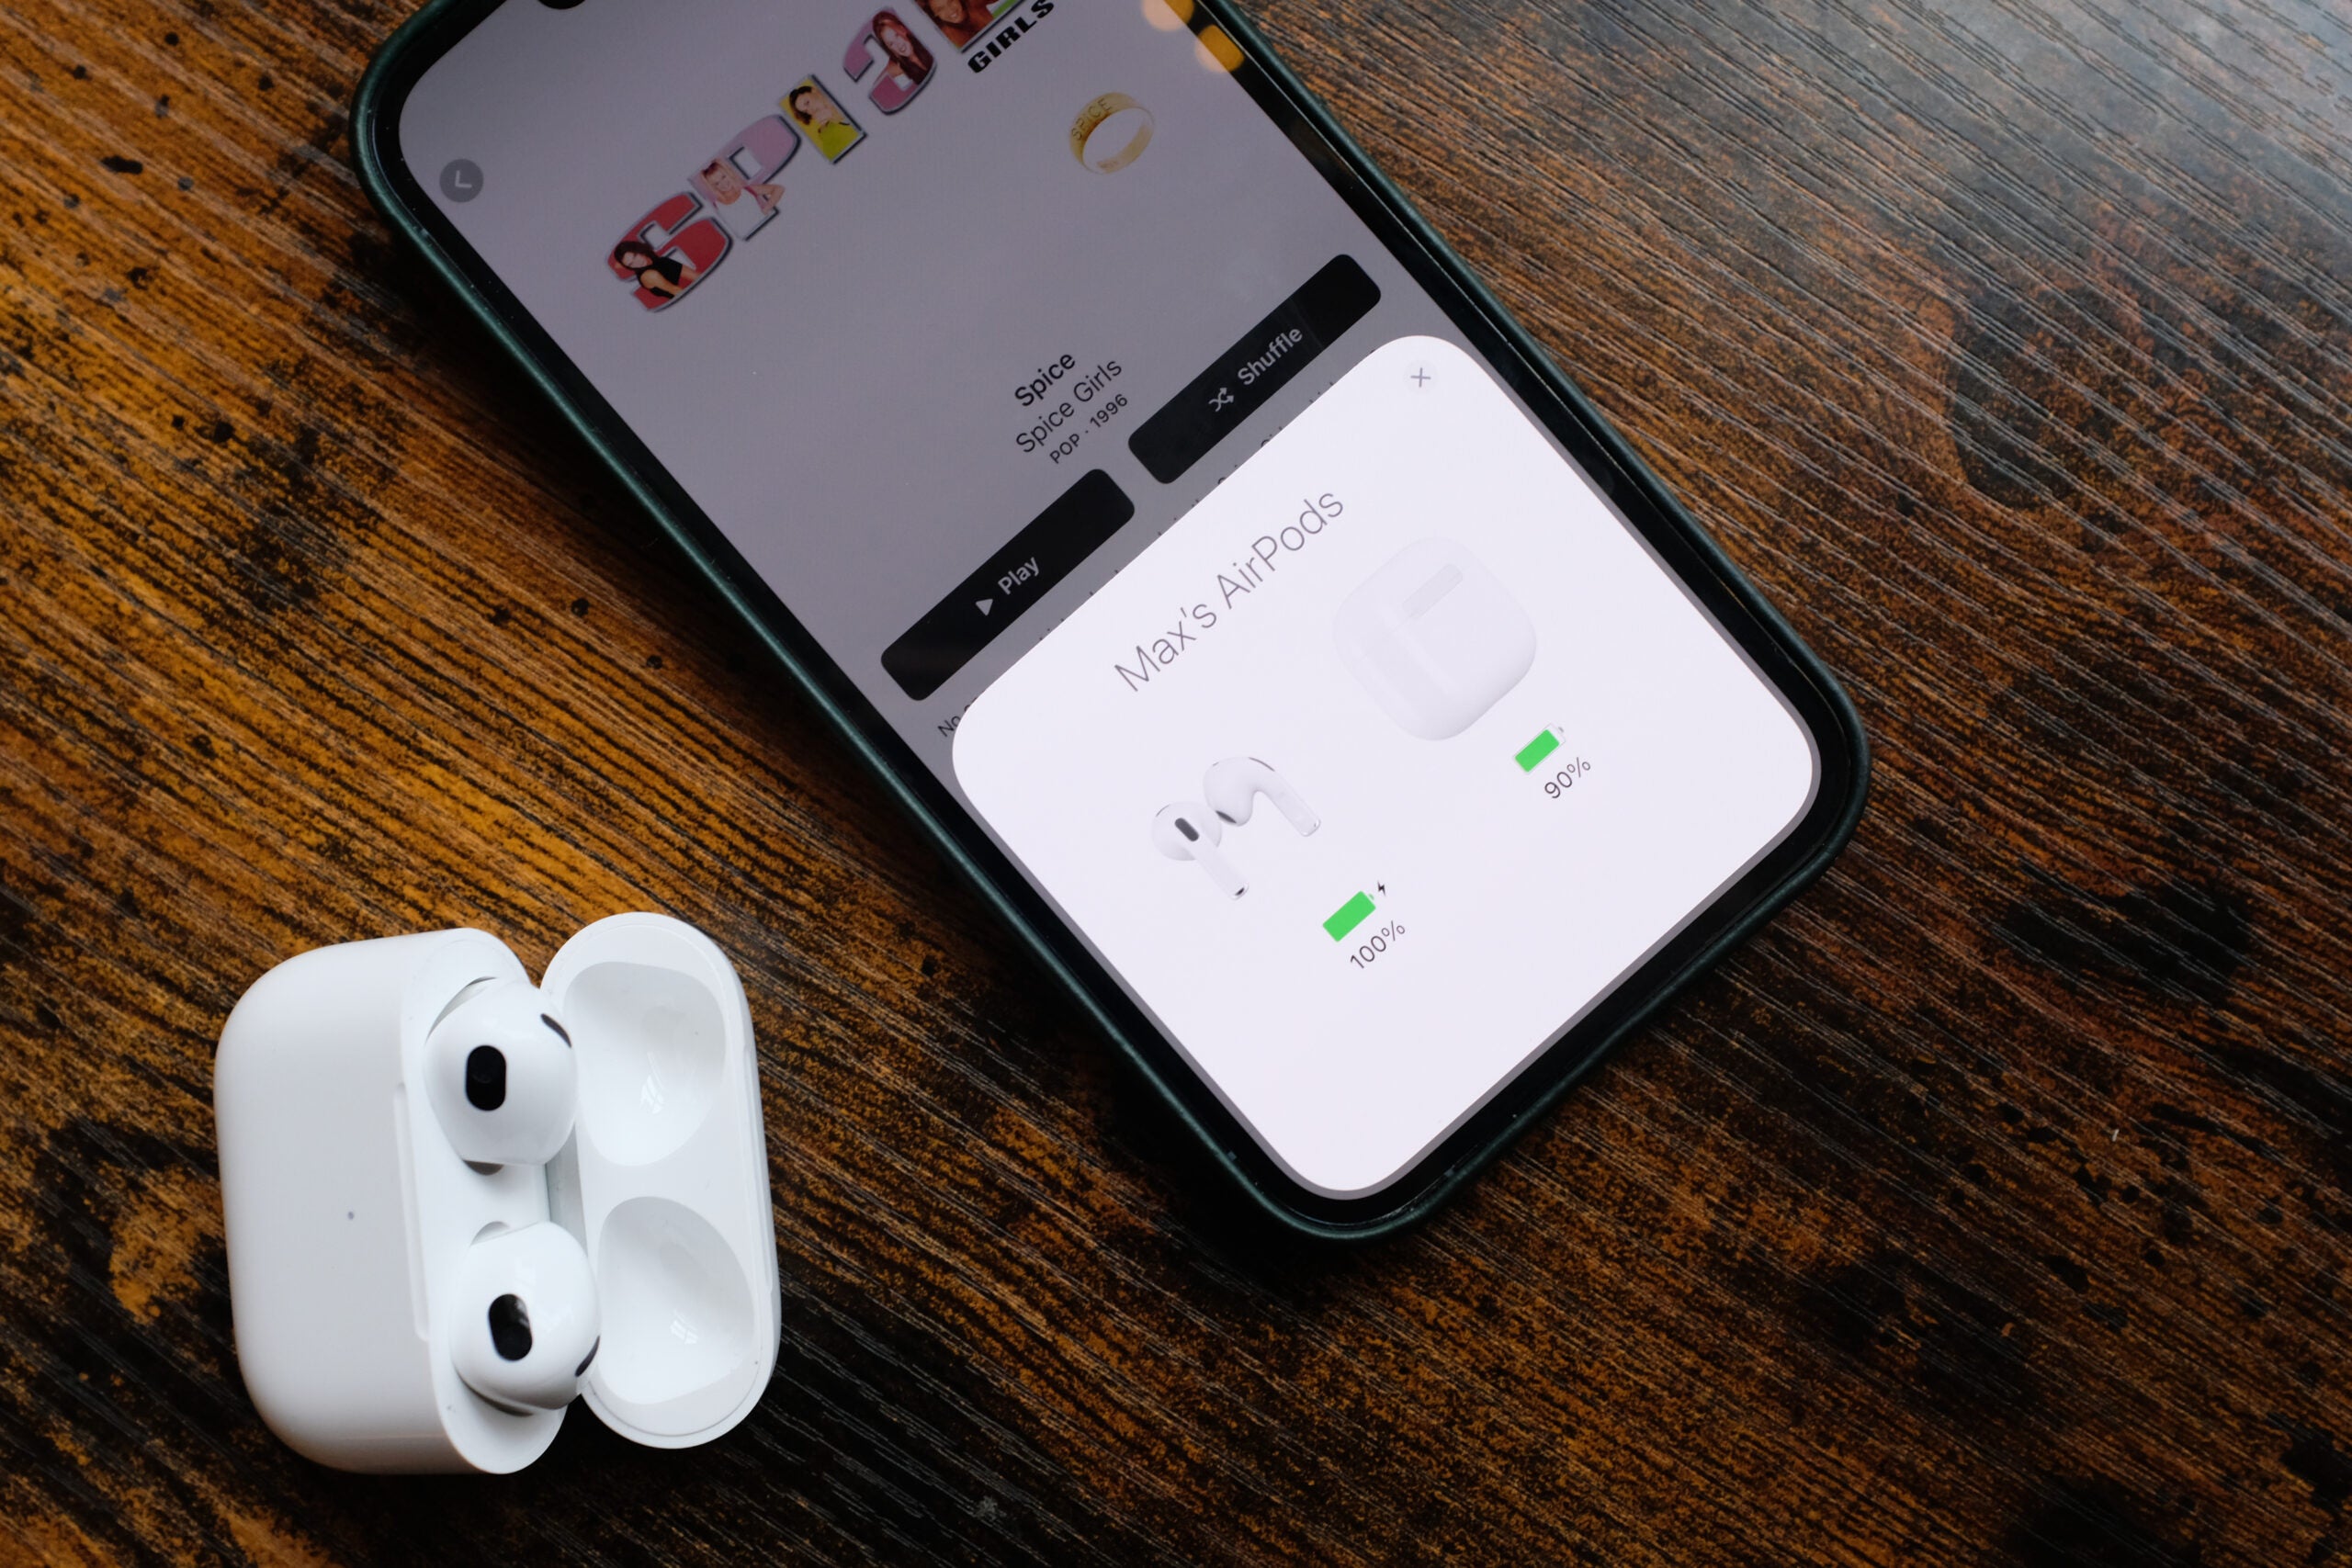 How to Find Airpods on Android?